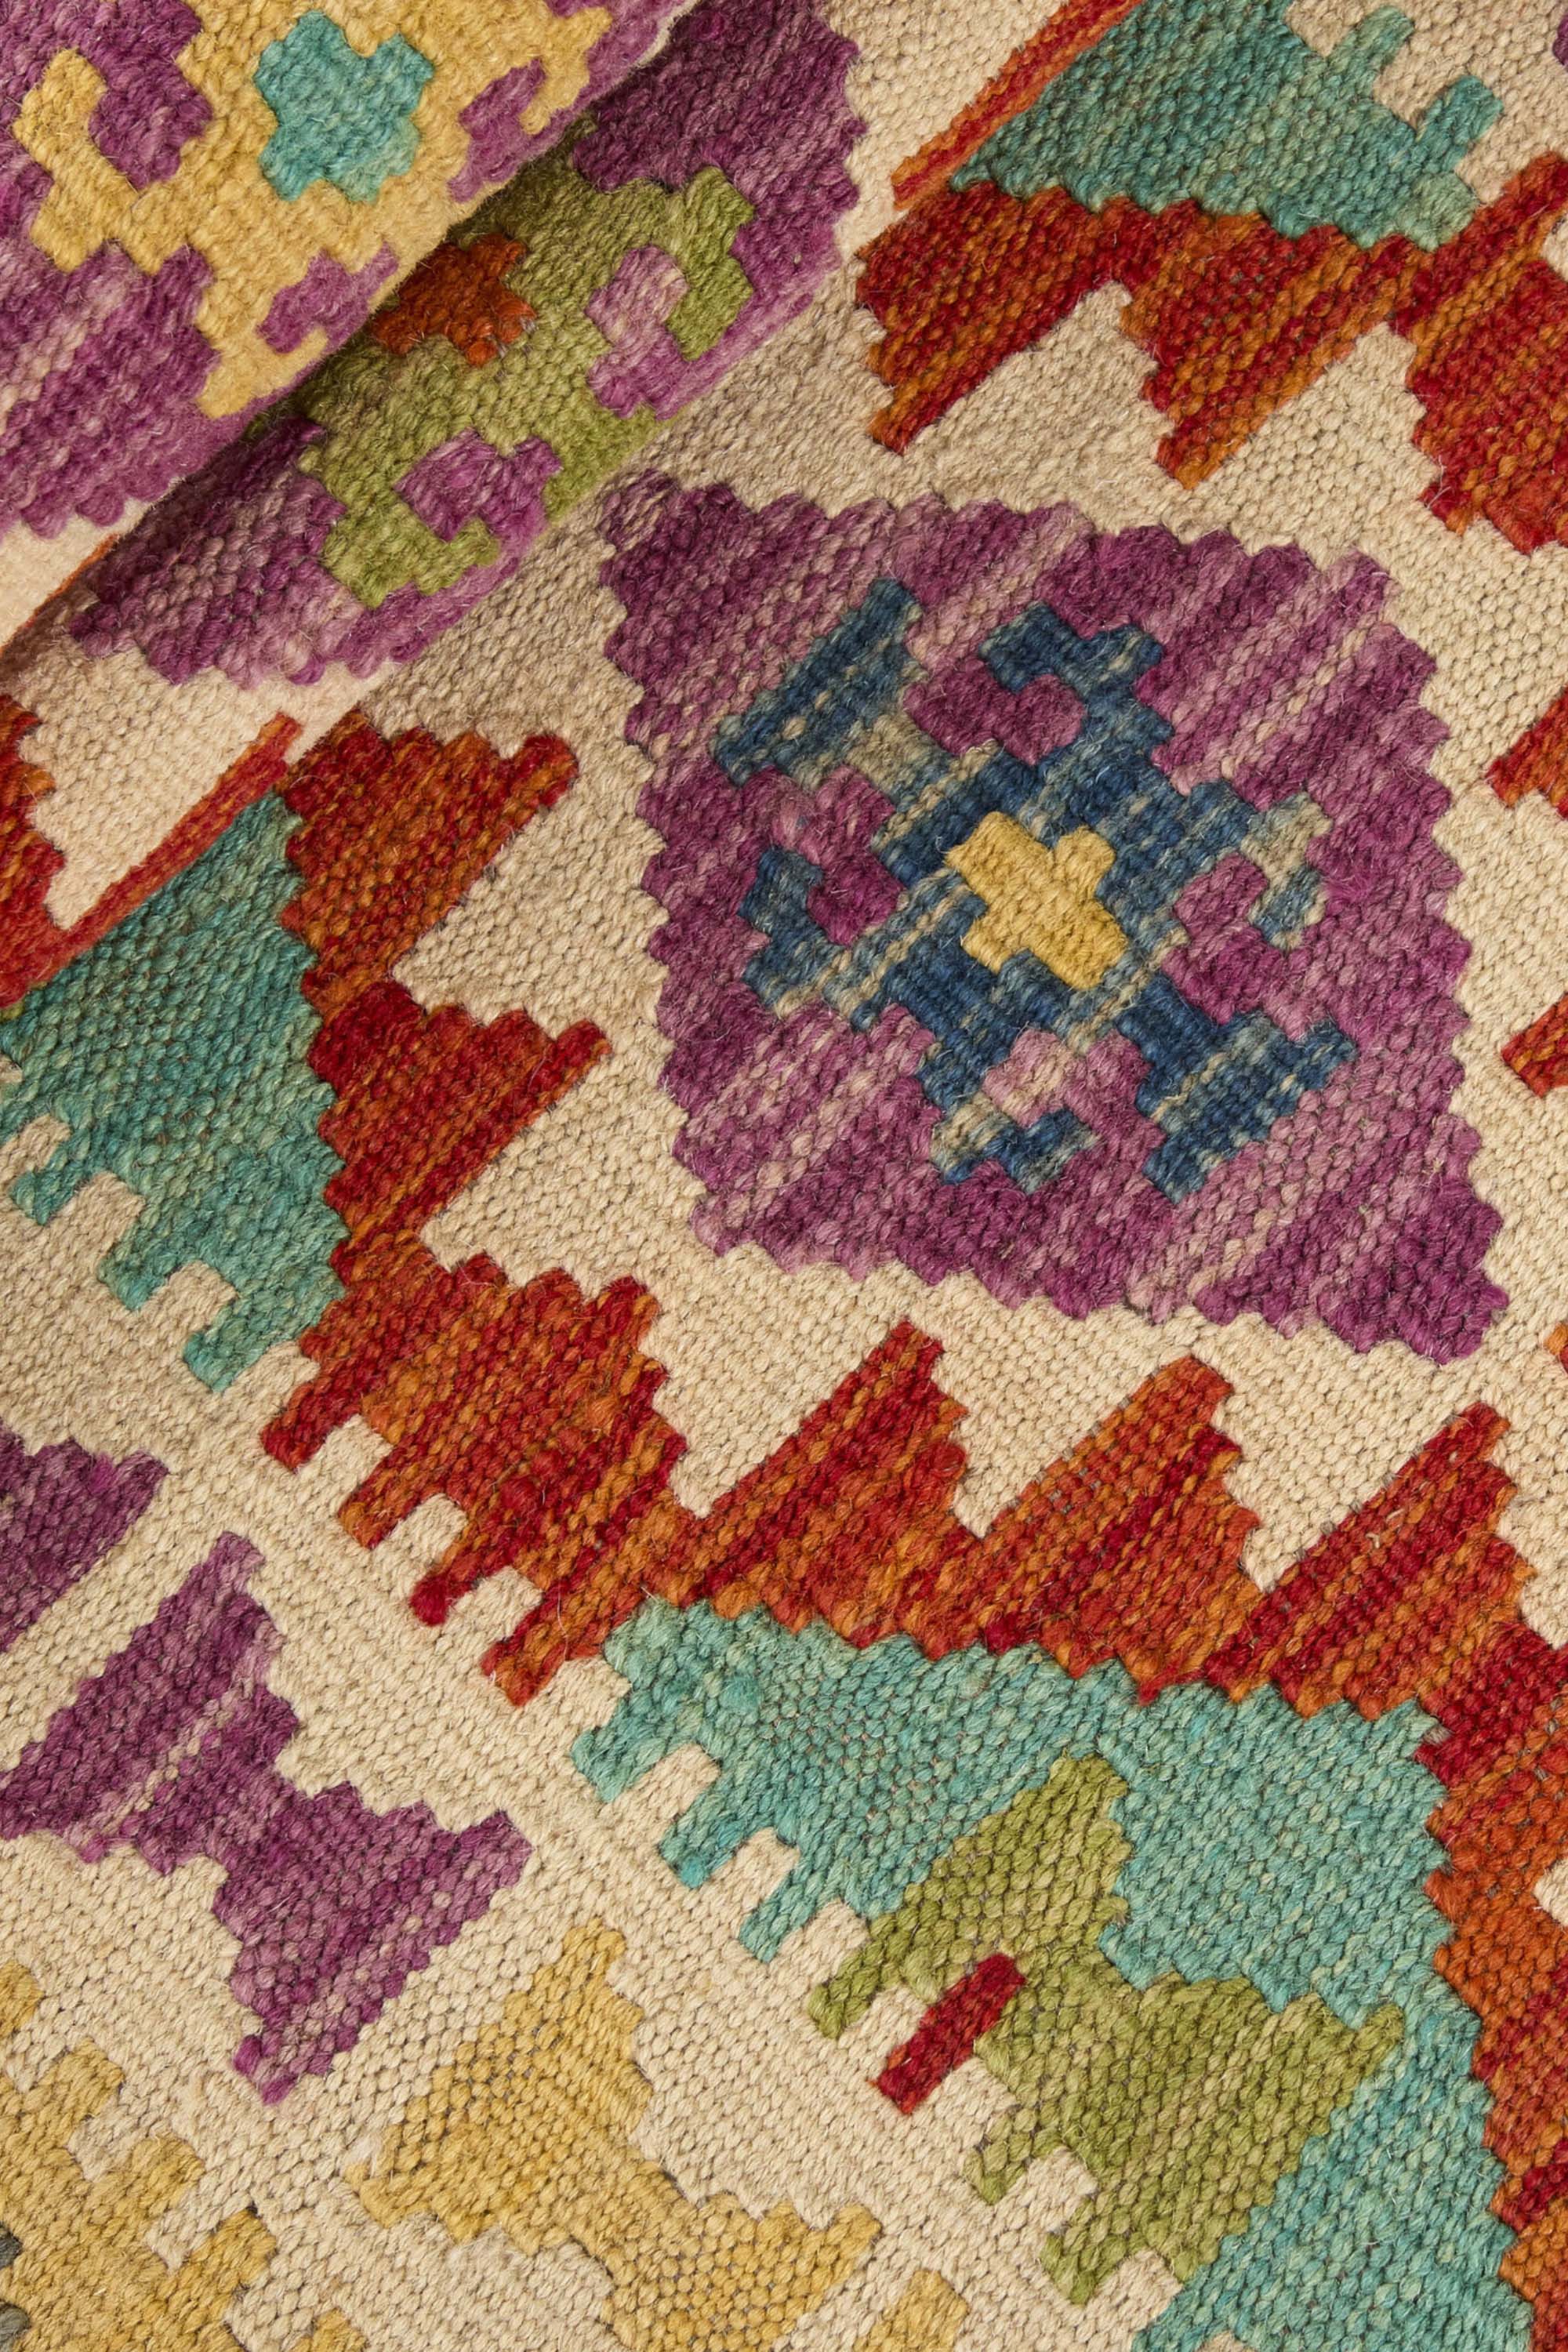 Authentic Persian Kilim flatweave runner with traditional multicolour pattern